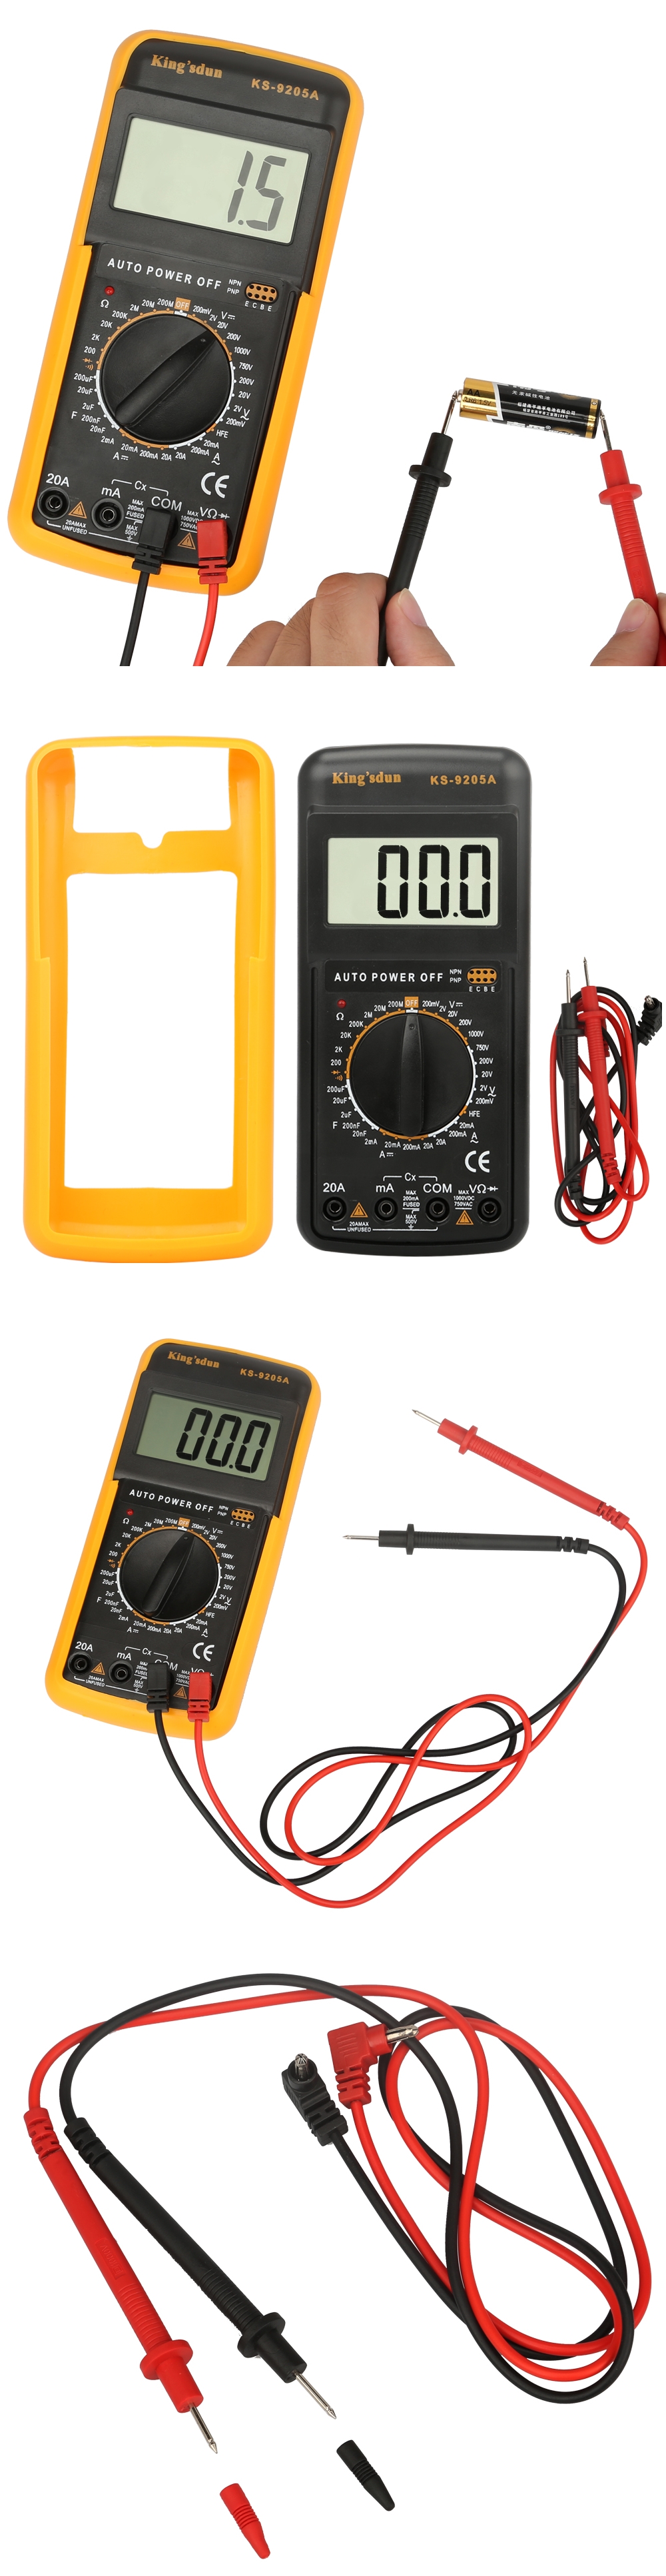 A large marketing image providing additional information about the product King'sdun Digital Multimeter Portable w/Capacitance Meter - Additional alt info not provided